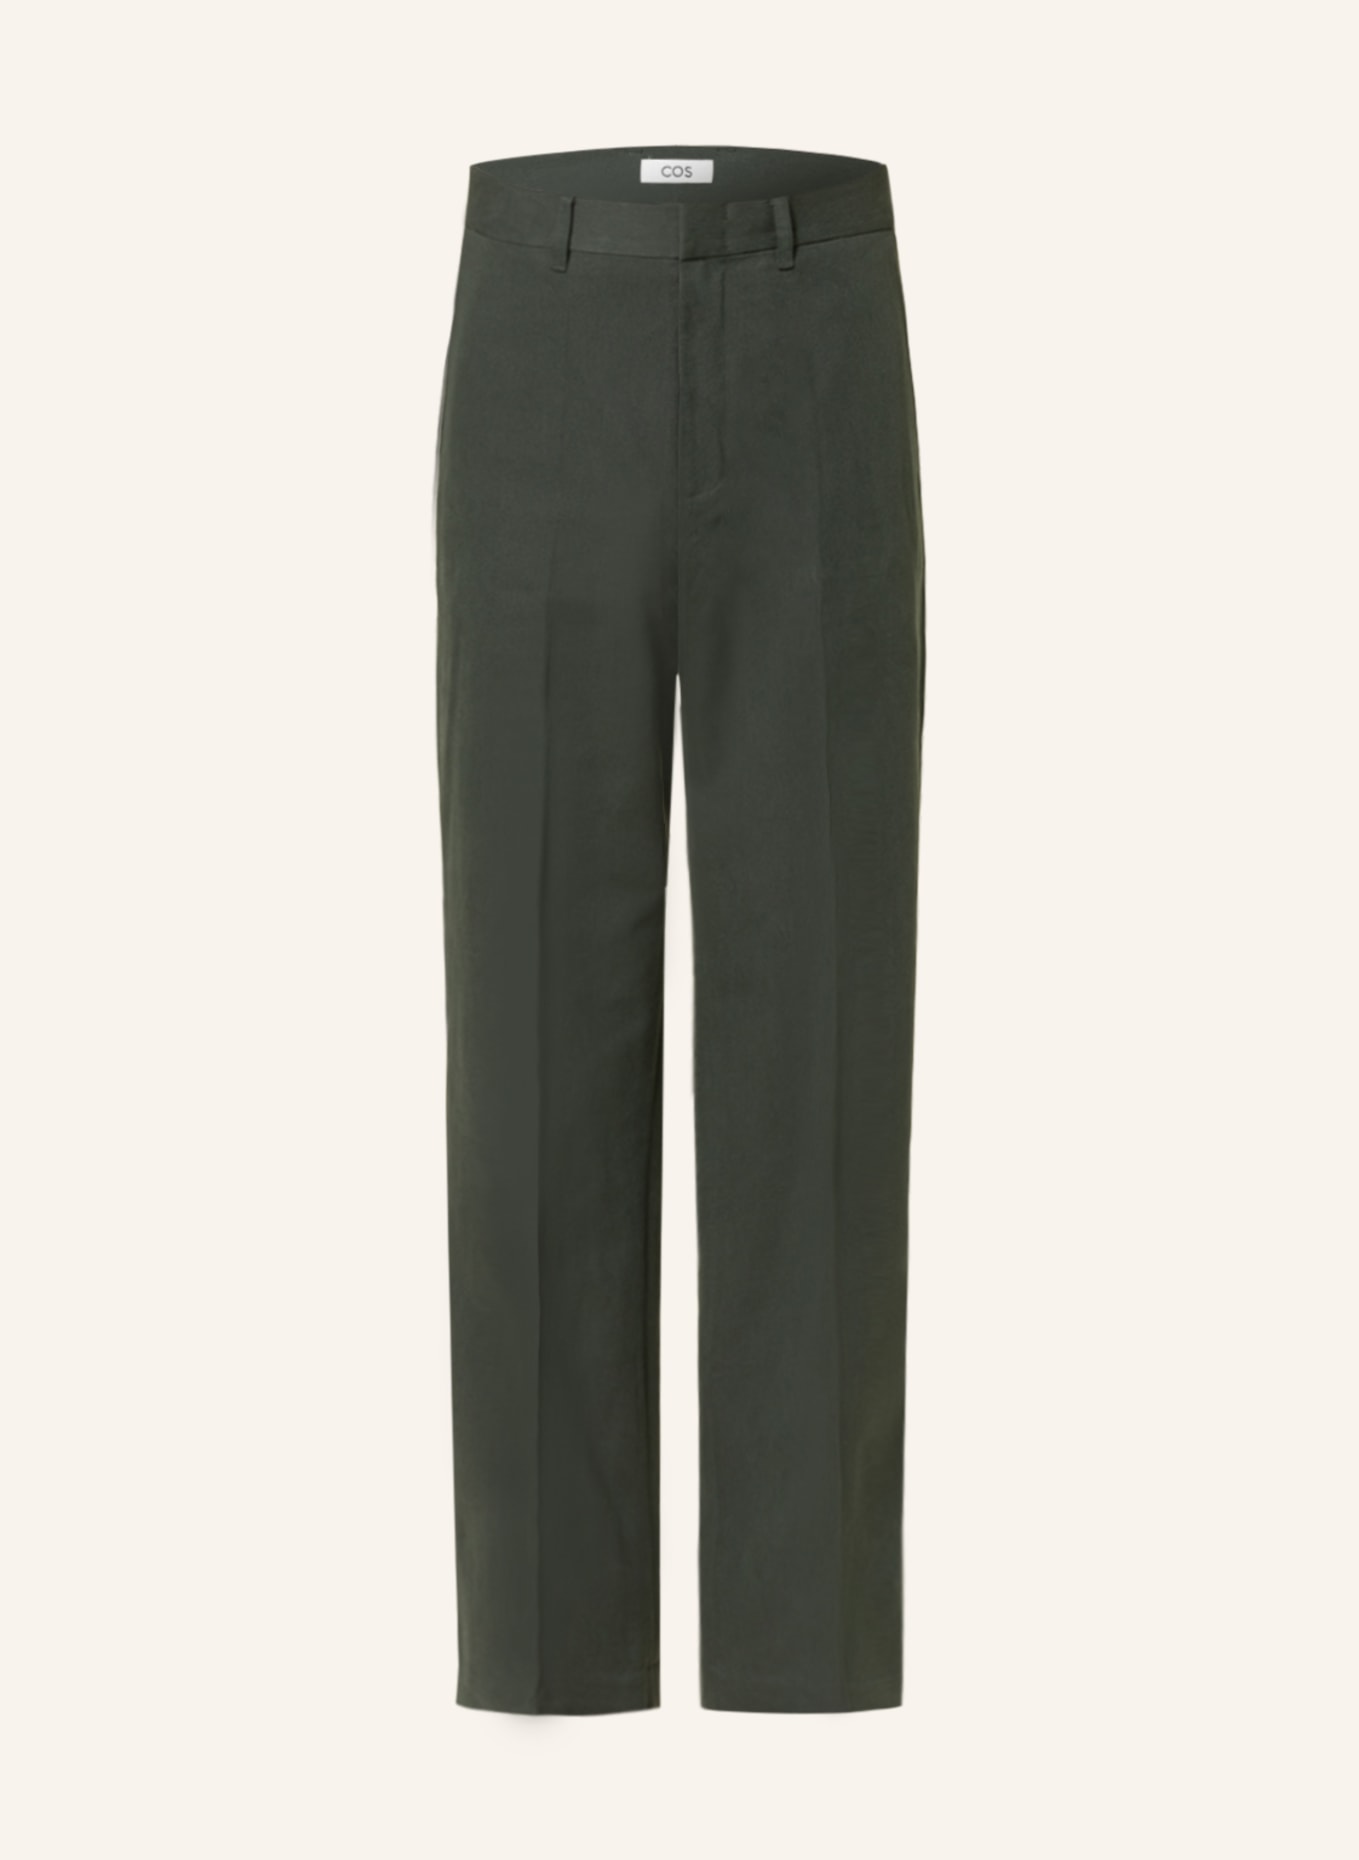 COS - Breathable texture to your wardrobe. These drawstring seersucker  trousers are the perfect laidback addition. Get ready for the brighter  days.​ Shop shirts: https://bit.ly/3rKzv2E ​ Shop trousers:  https://bit.ly/3sKPpeI | Facebook